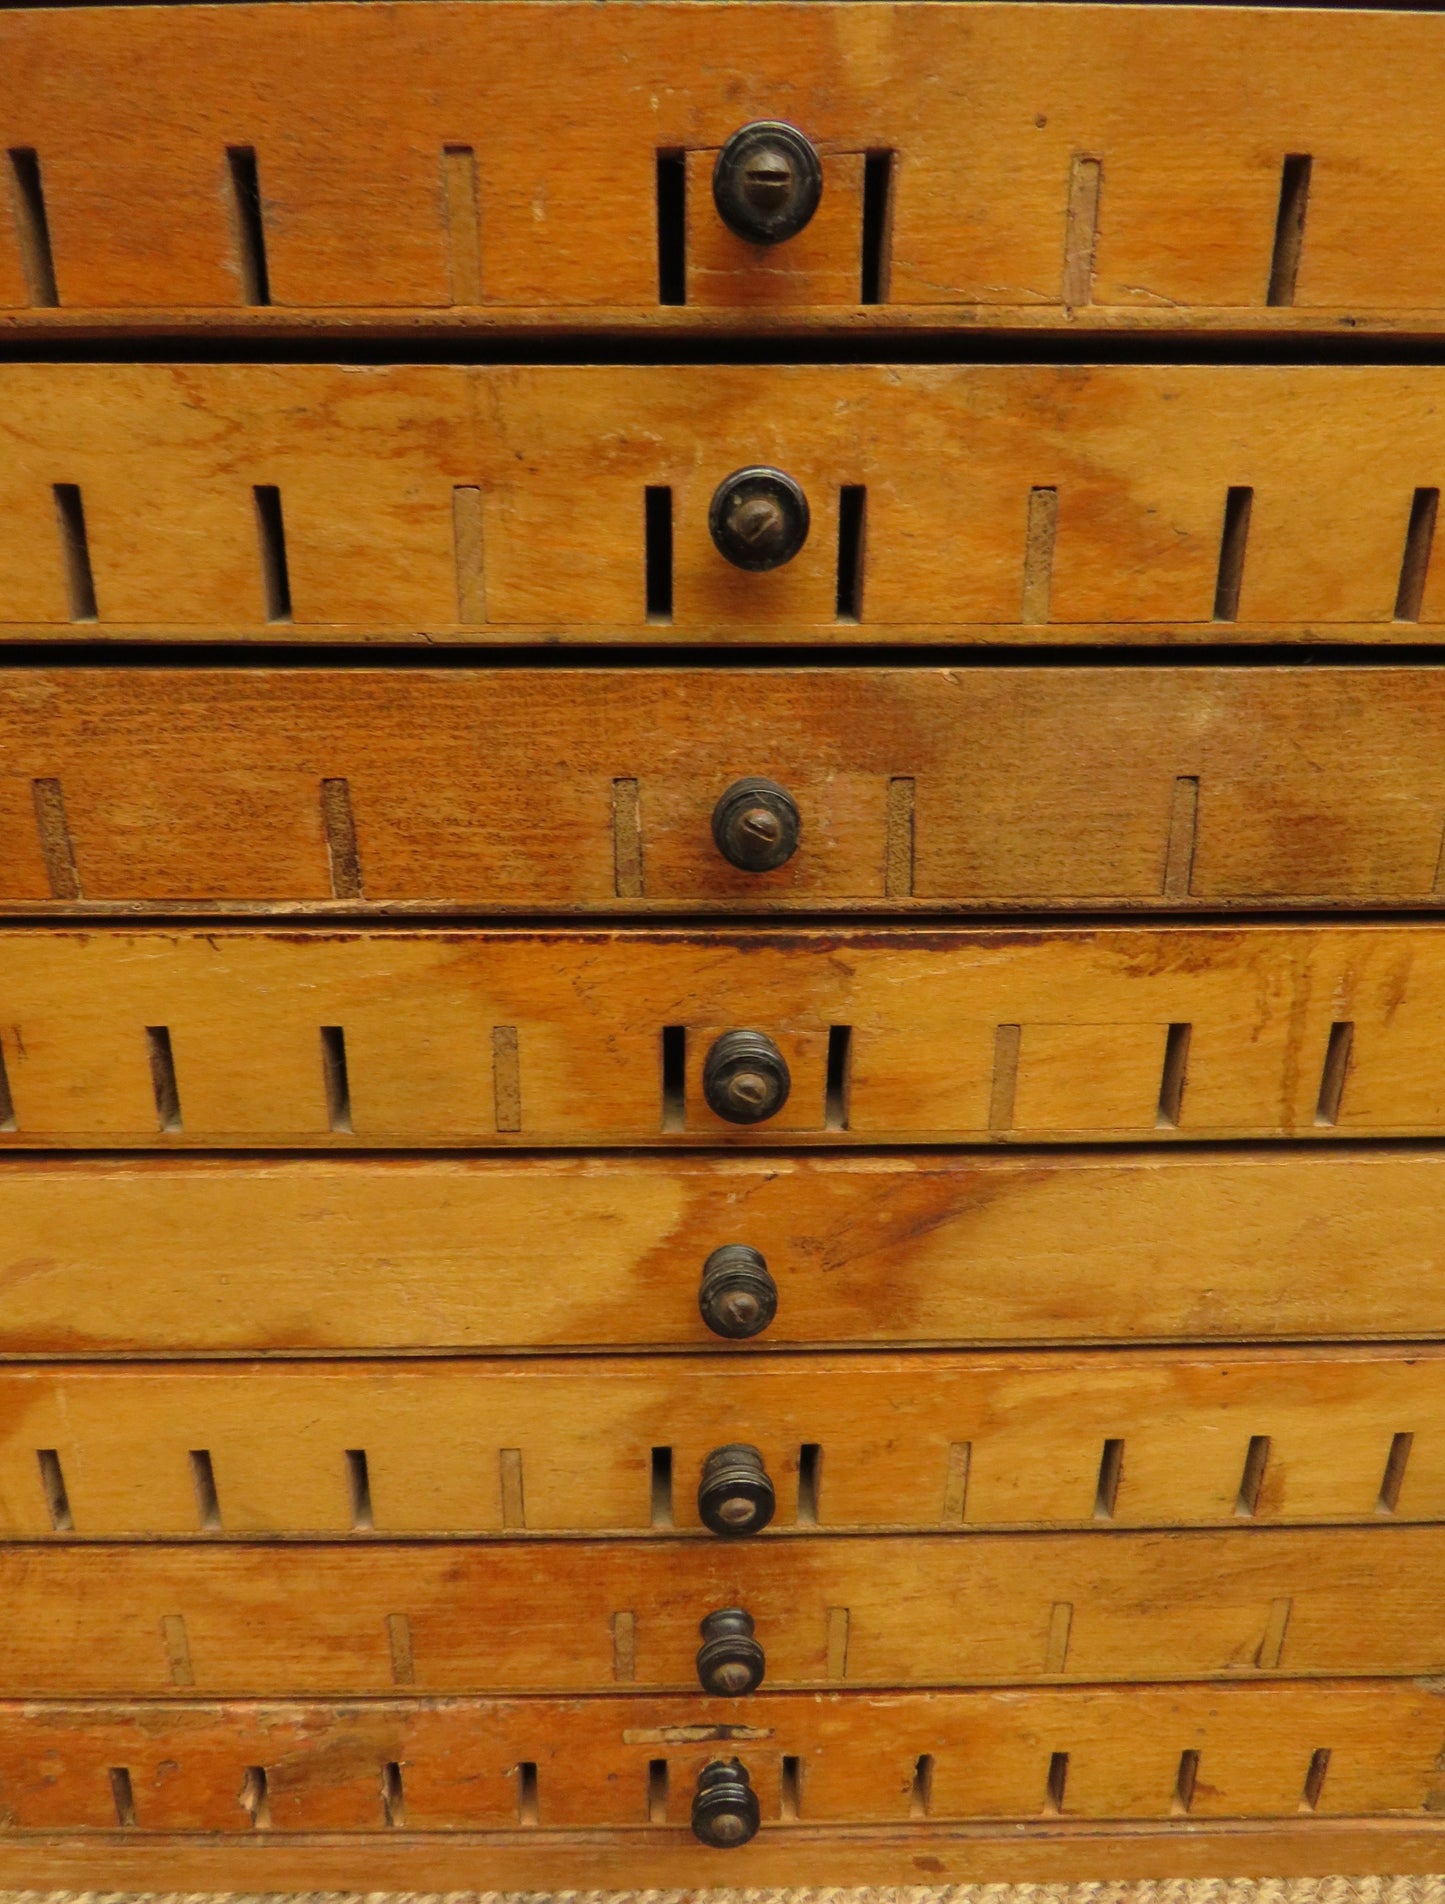 Vintage Letterpress Printers Drawers with Brass Letter Stamps from a Tobacconist